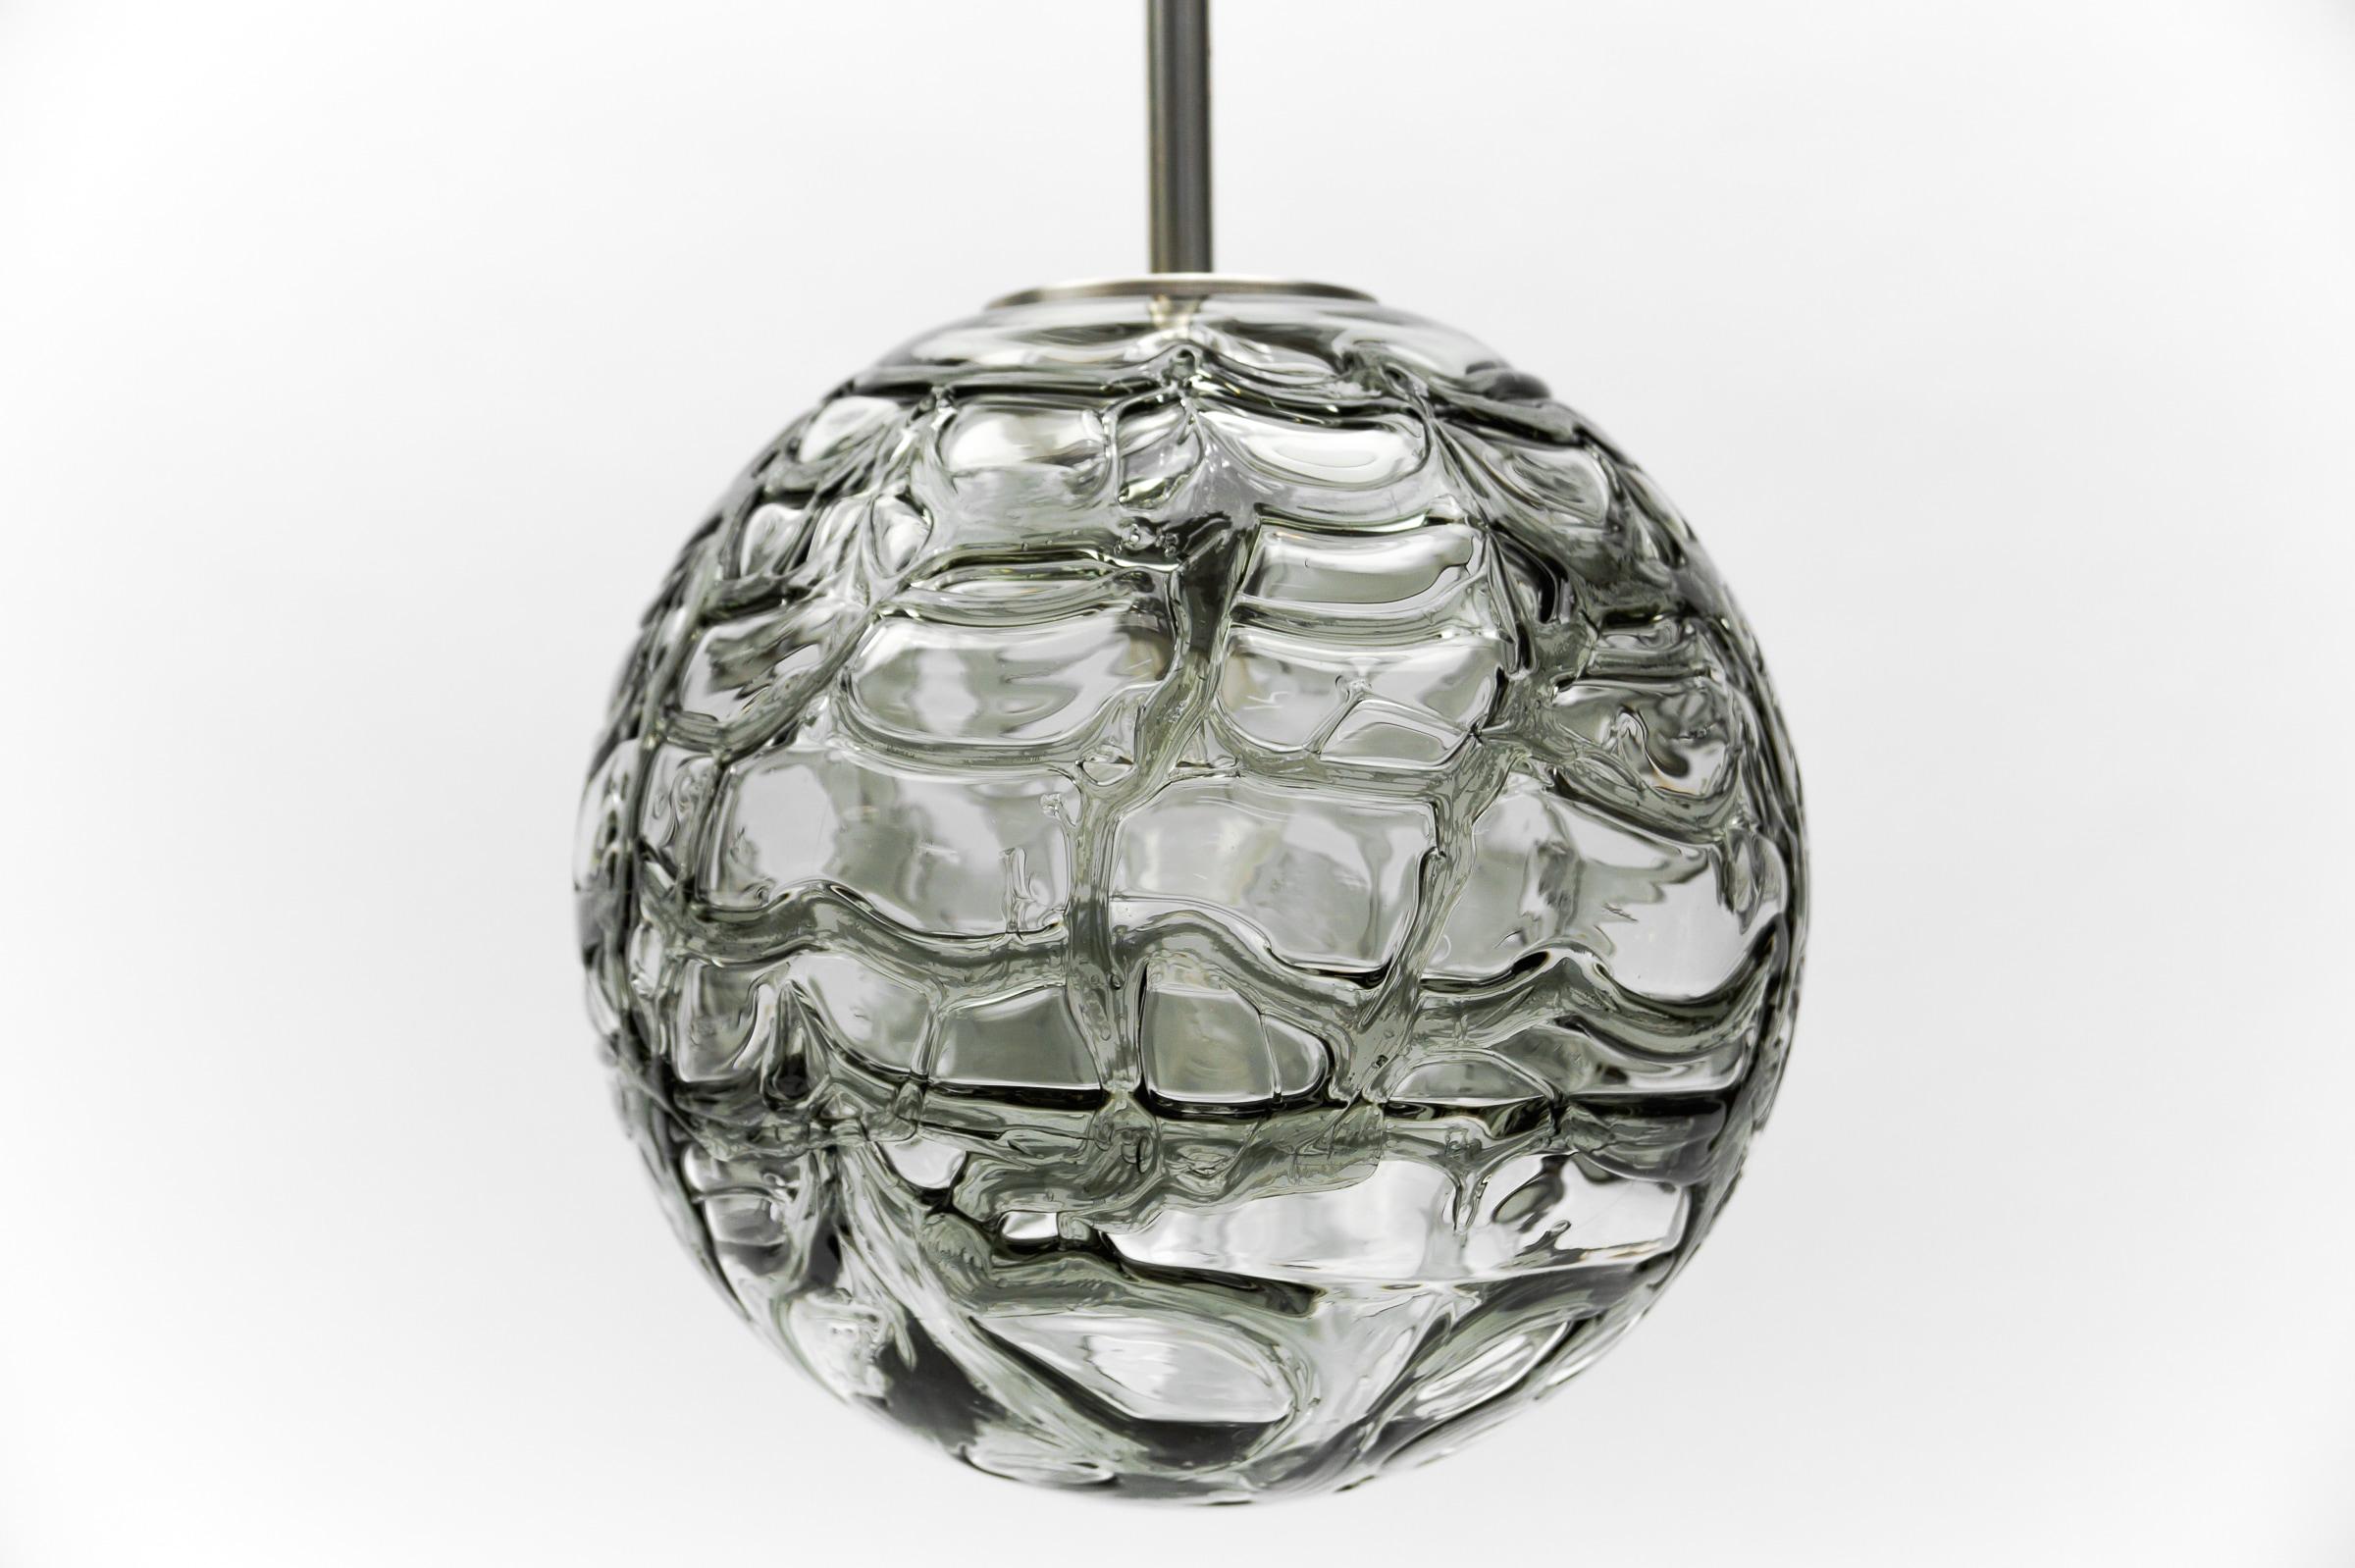 Metal Lovely Black Murano Glass Ball Pendant Lamp by Doria, - 1960s Germany For Sale